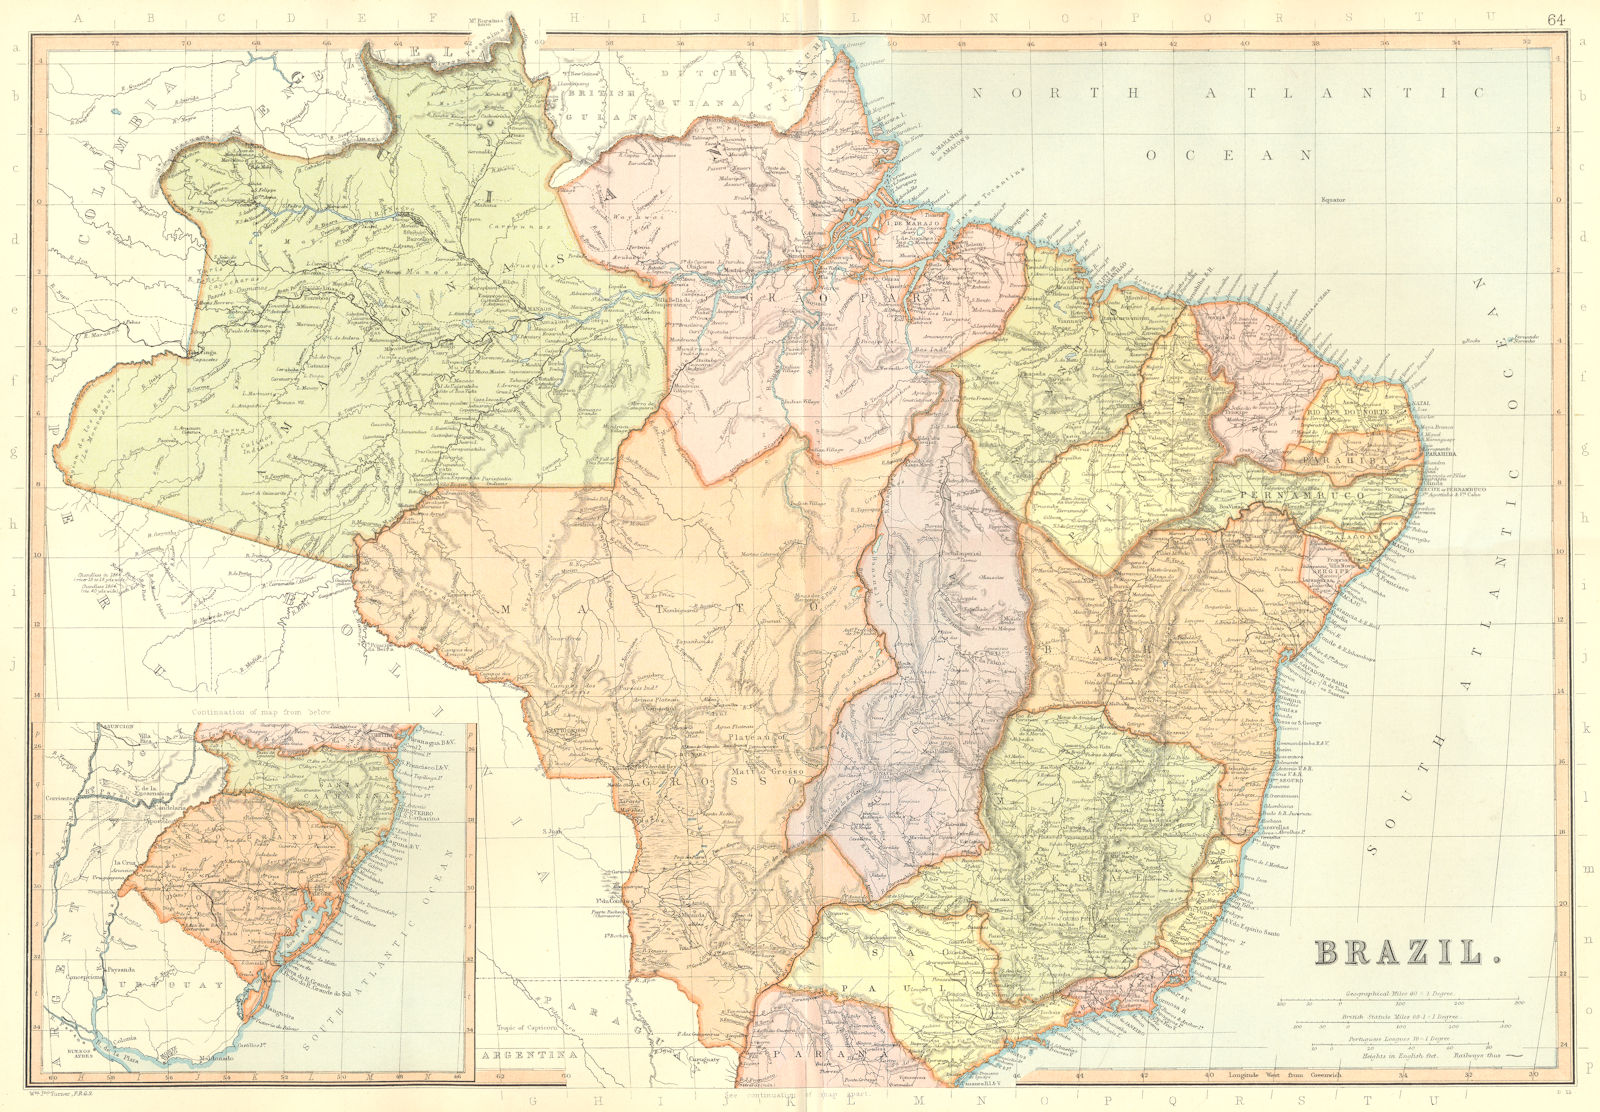 BRAZIL. showing states. Railways. Scale in Portuguese Leagues.BLACKIE 1893 map